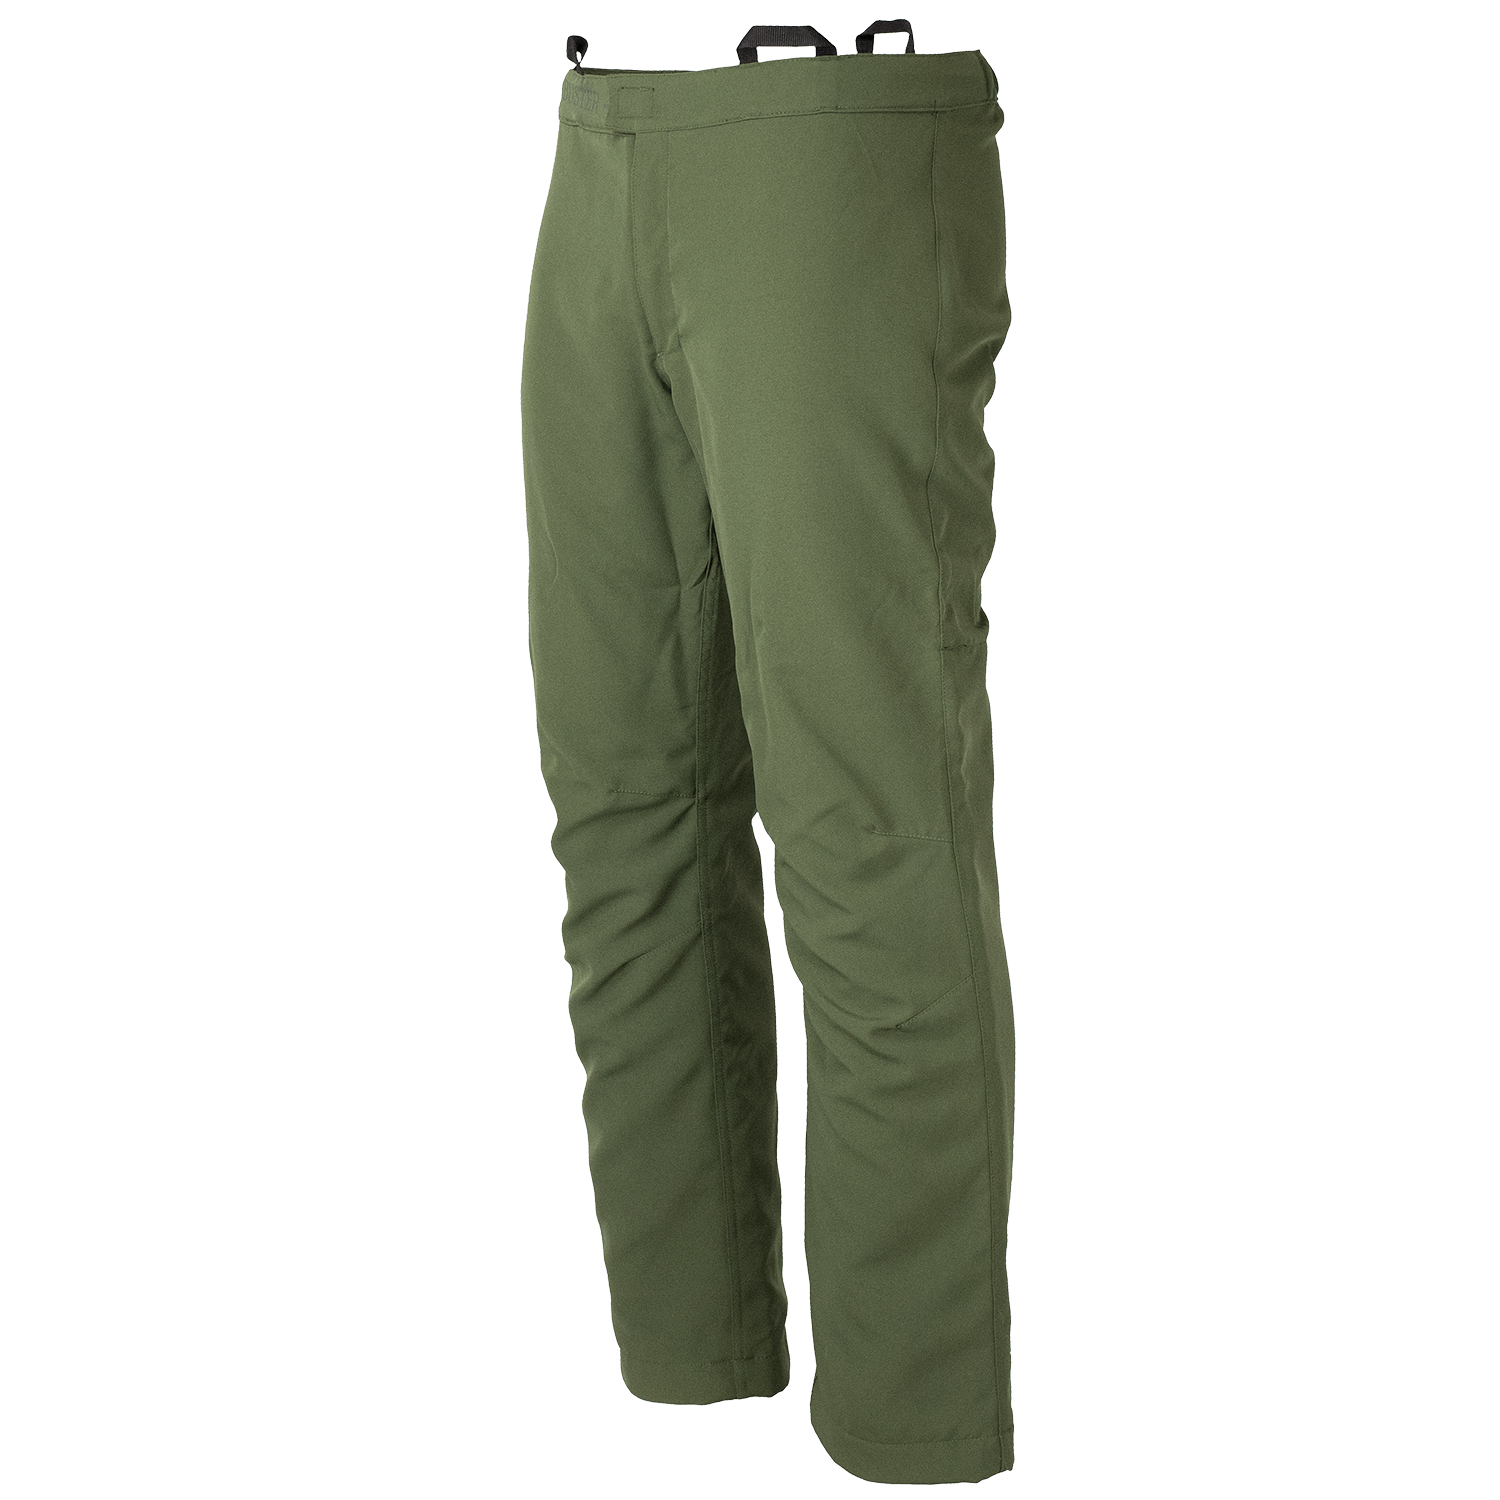 Pirscher Gear Boarbuster Protective Underpants - Hunting Trousers